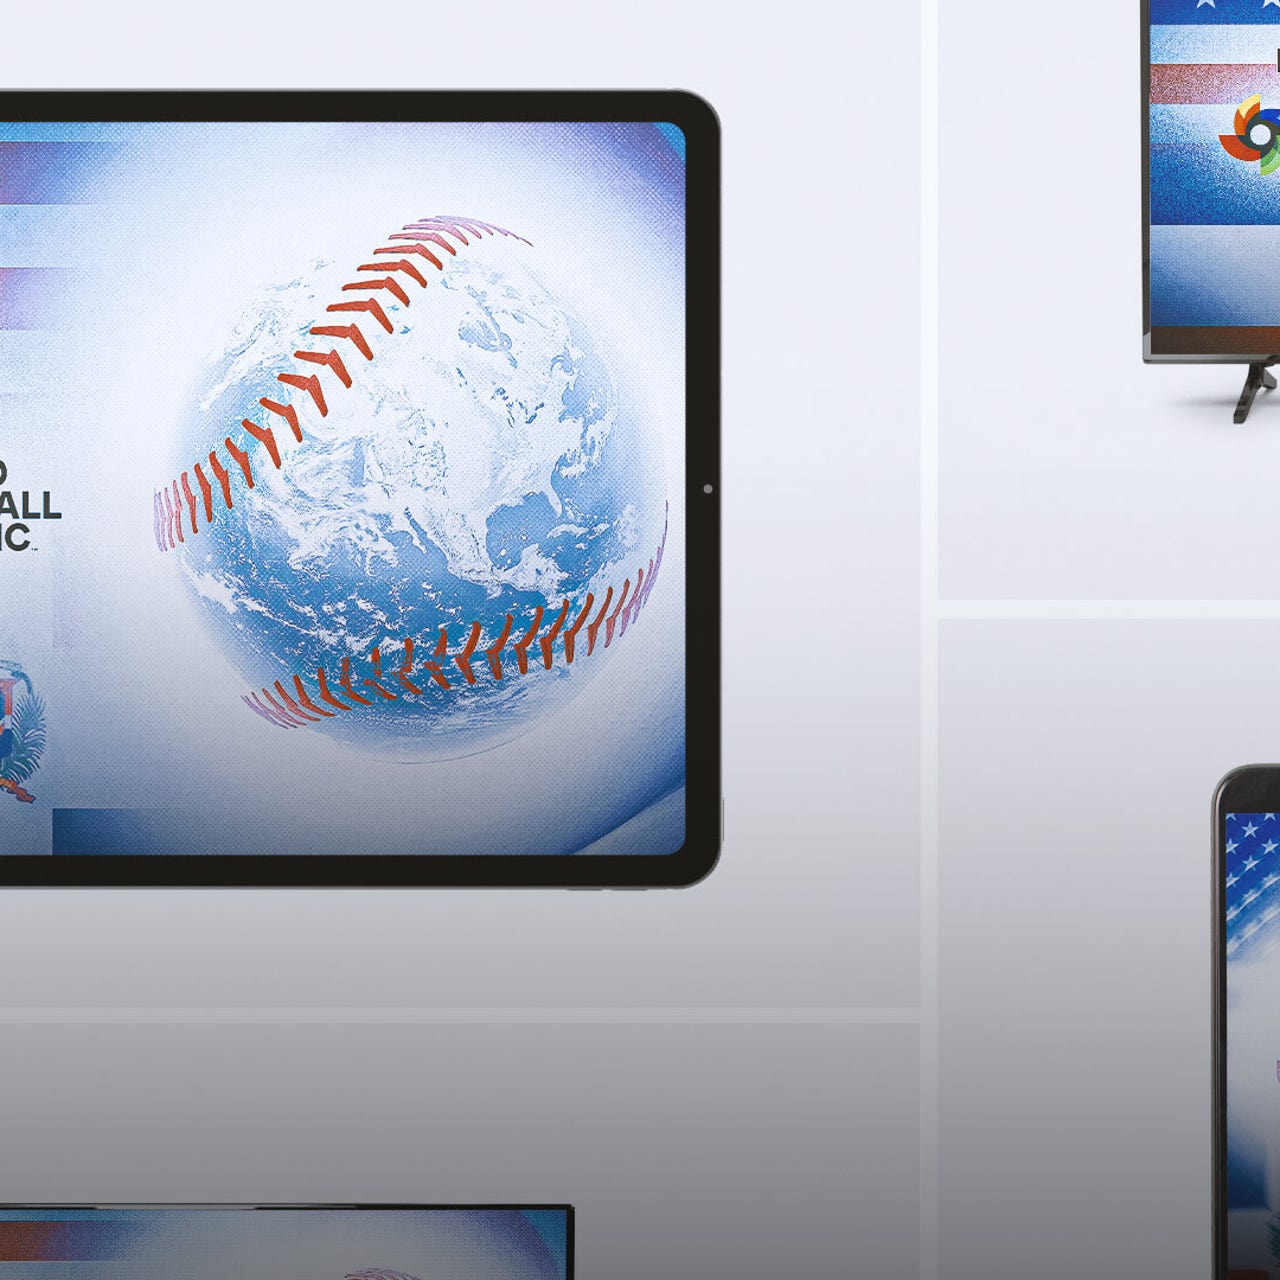 World Baseball Classic on X: The road to glory starts today